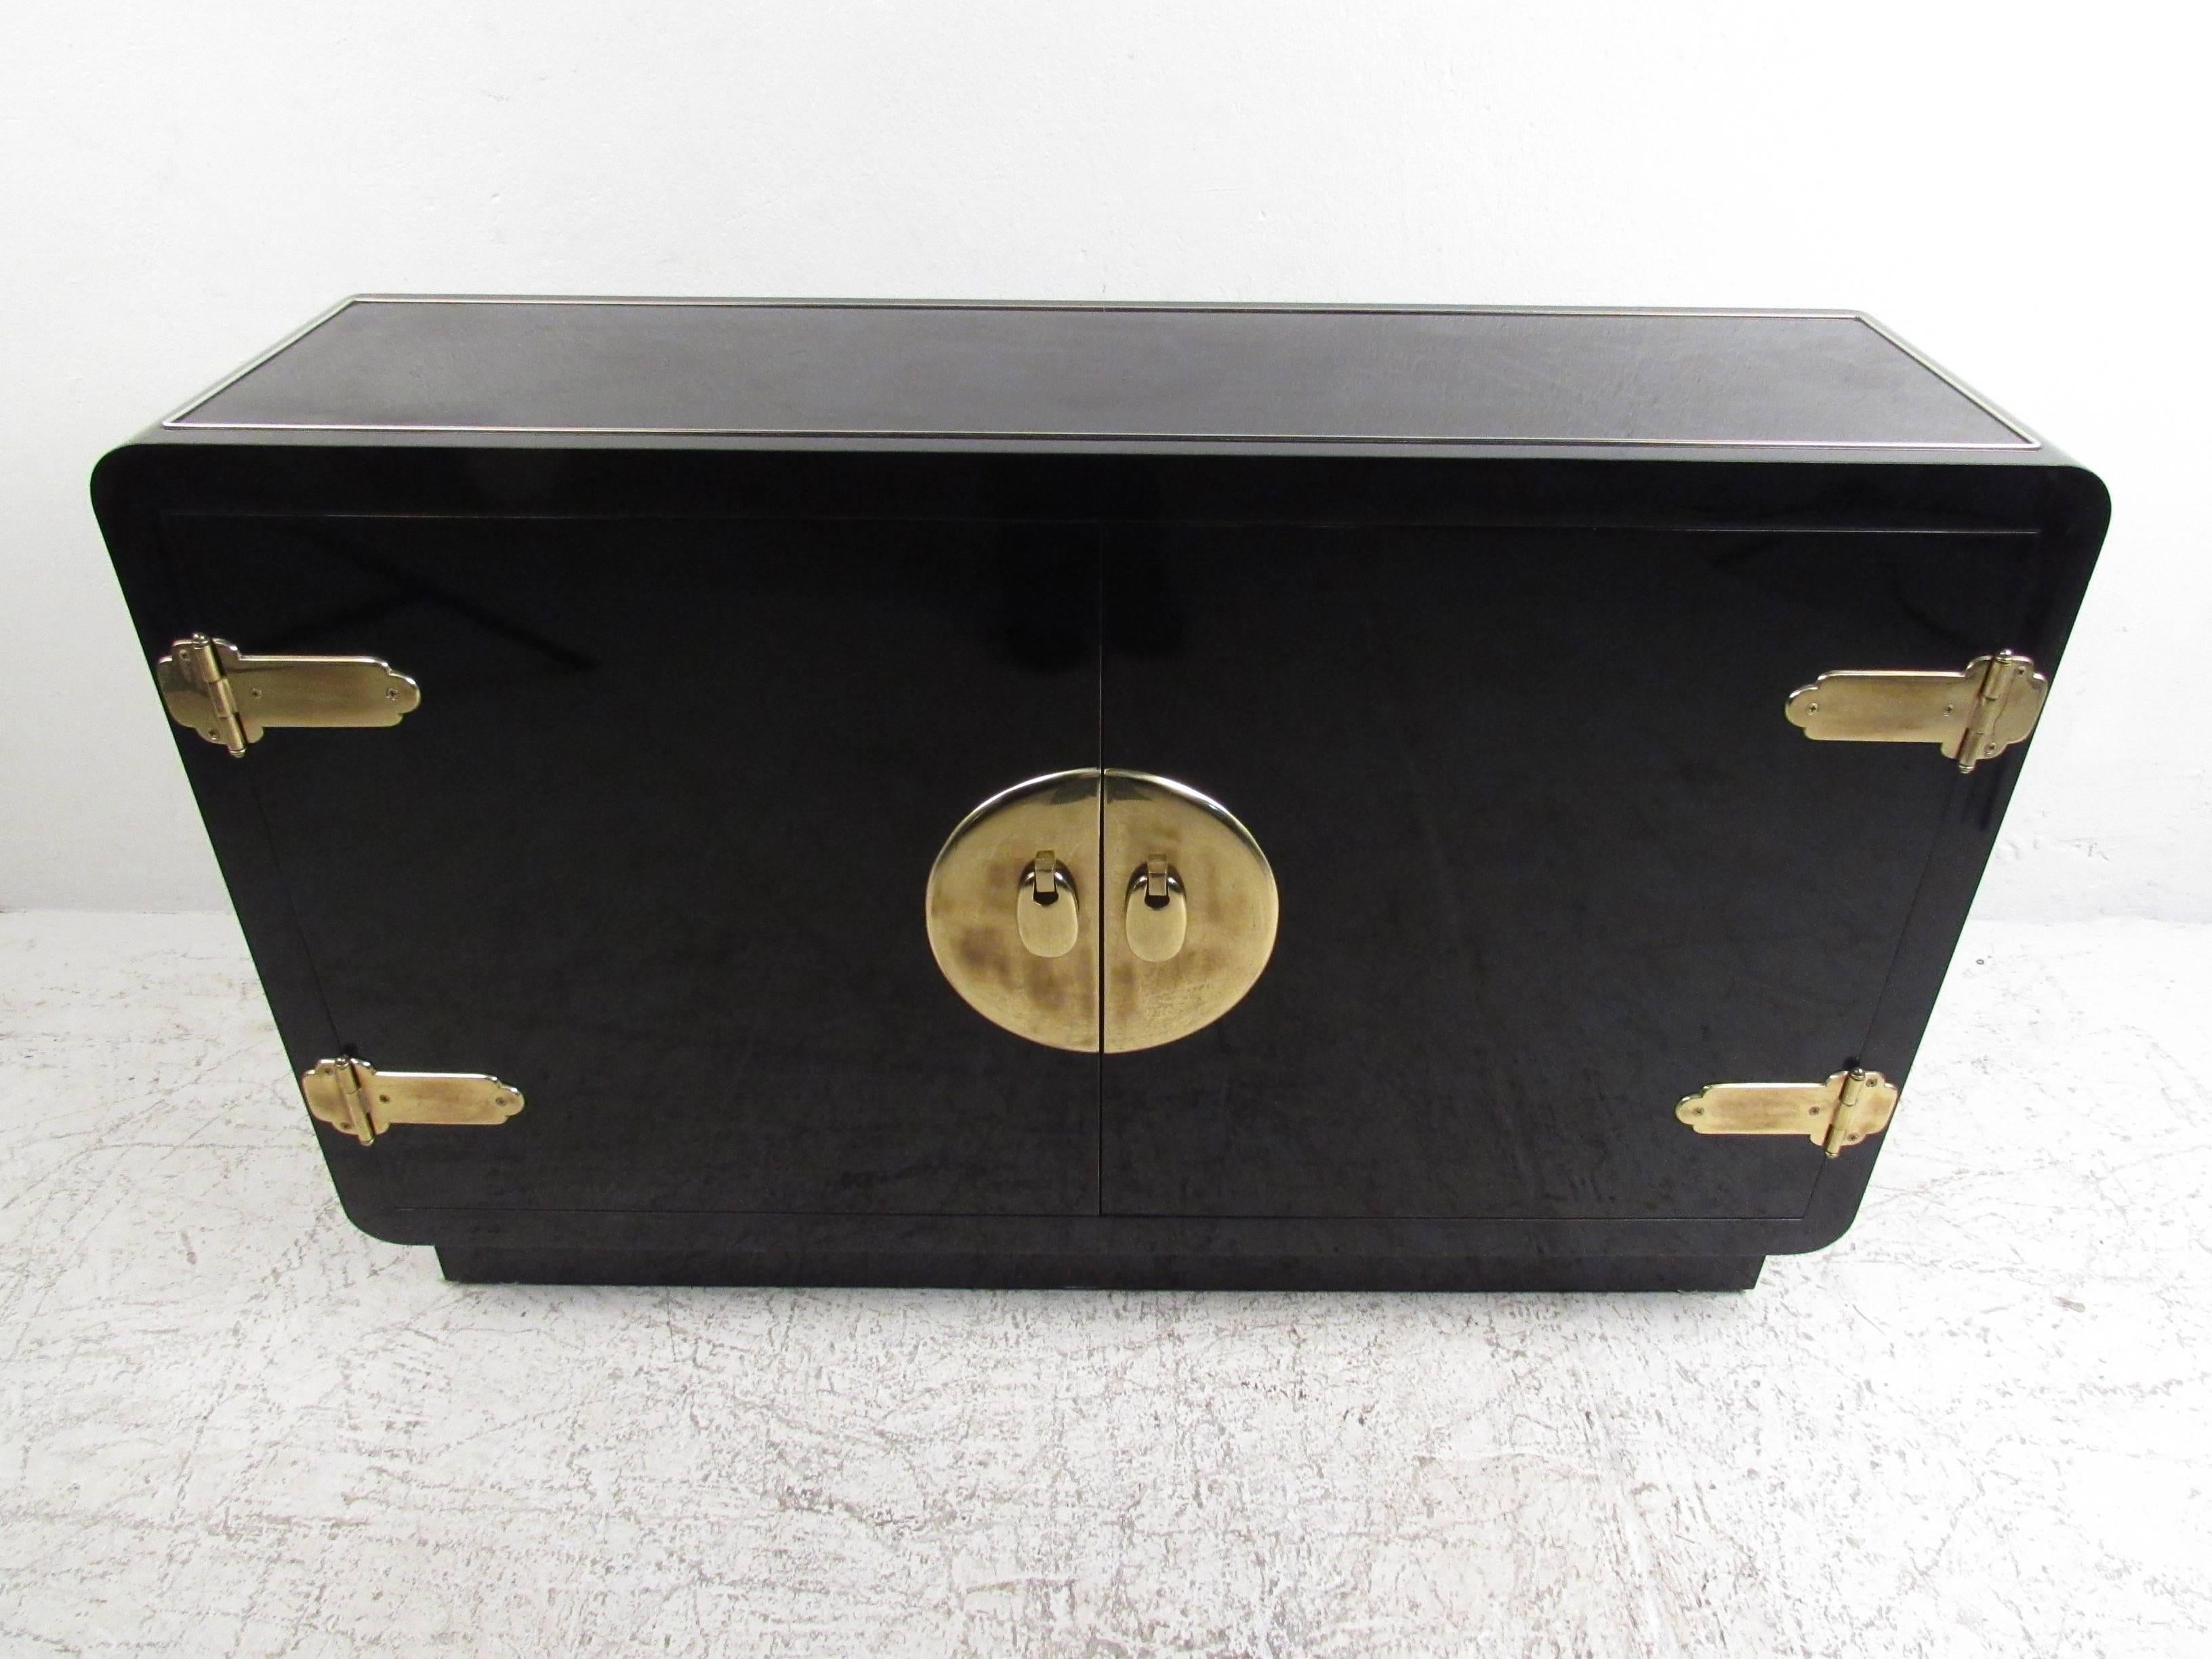 Art Deco Vintage Modern Asian Inspired Black Lacquer Cabinet by Mastercraft